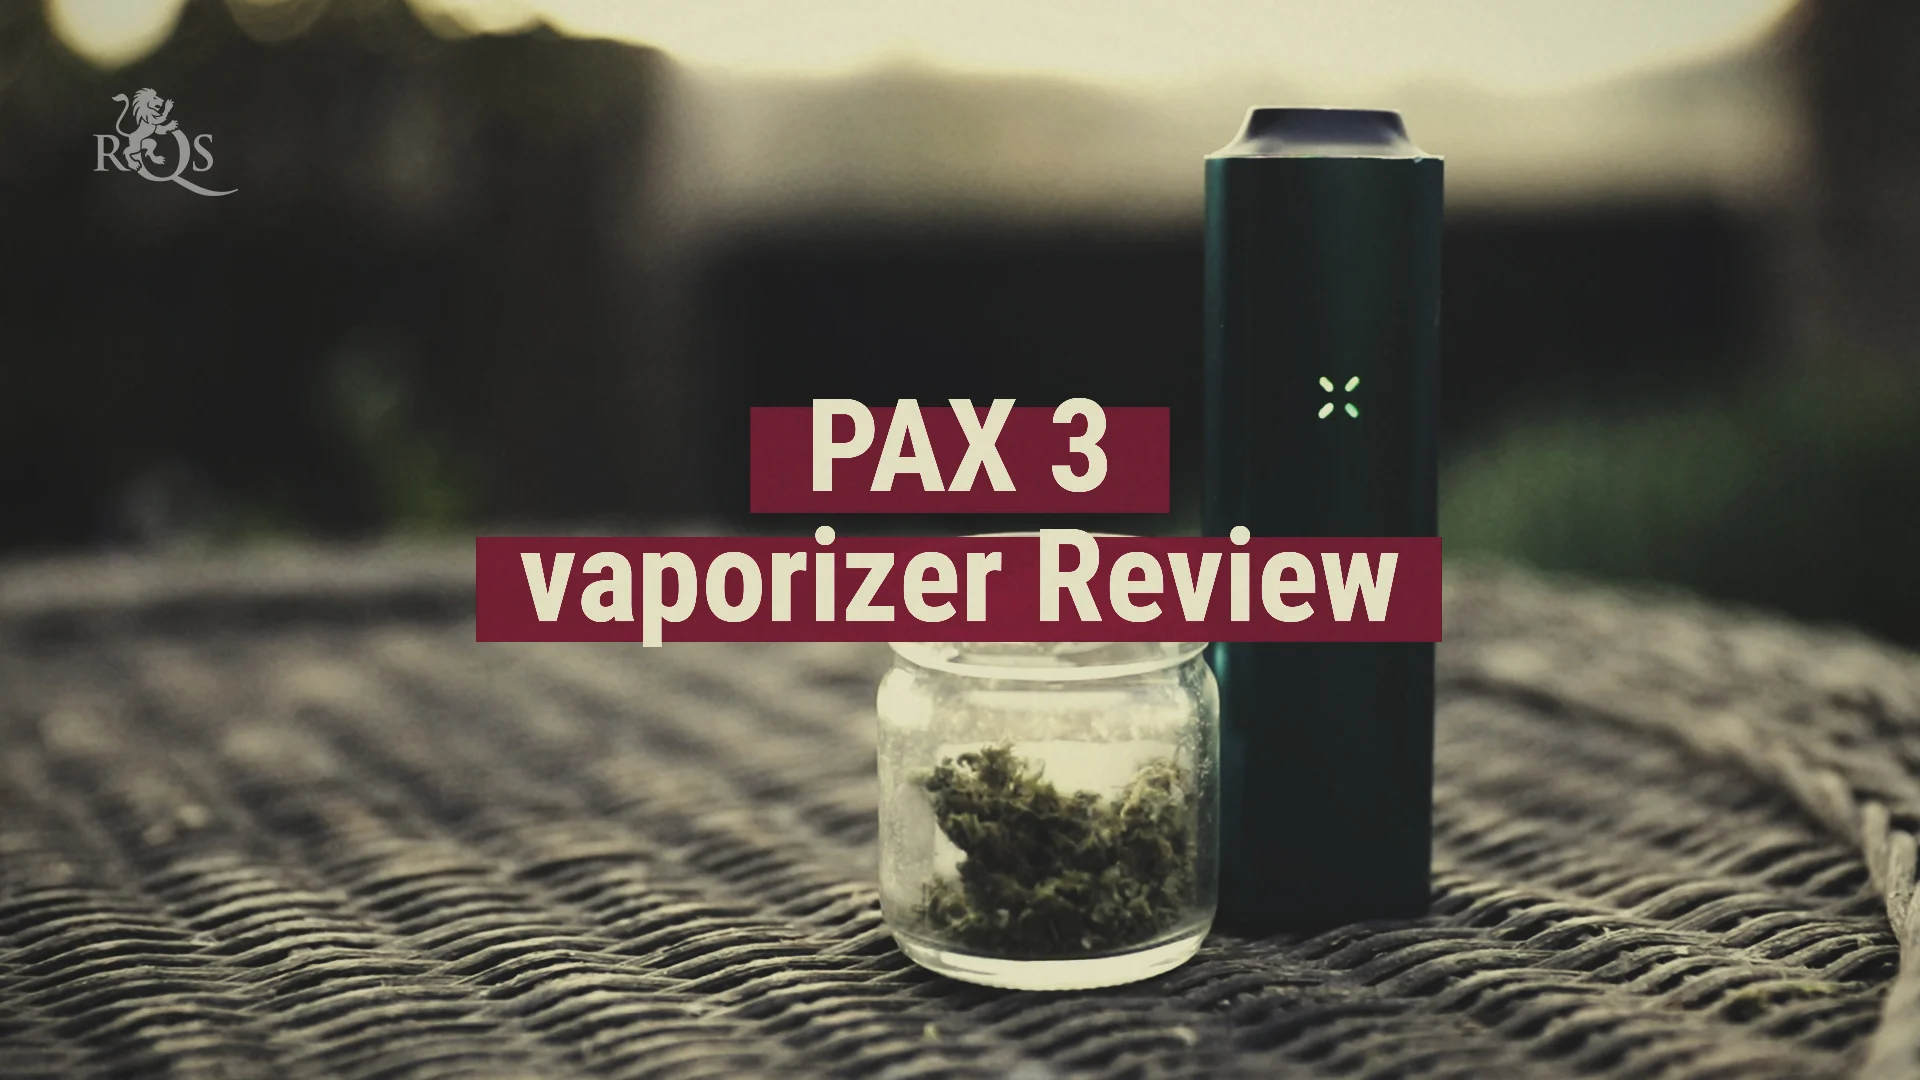 PAX 3 portable dry herb & concentrates vaporizer review on Vimeo